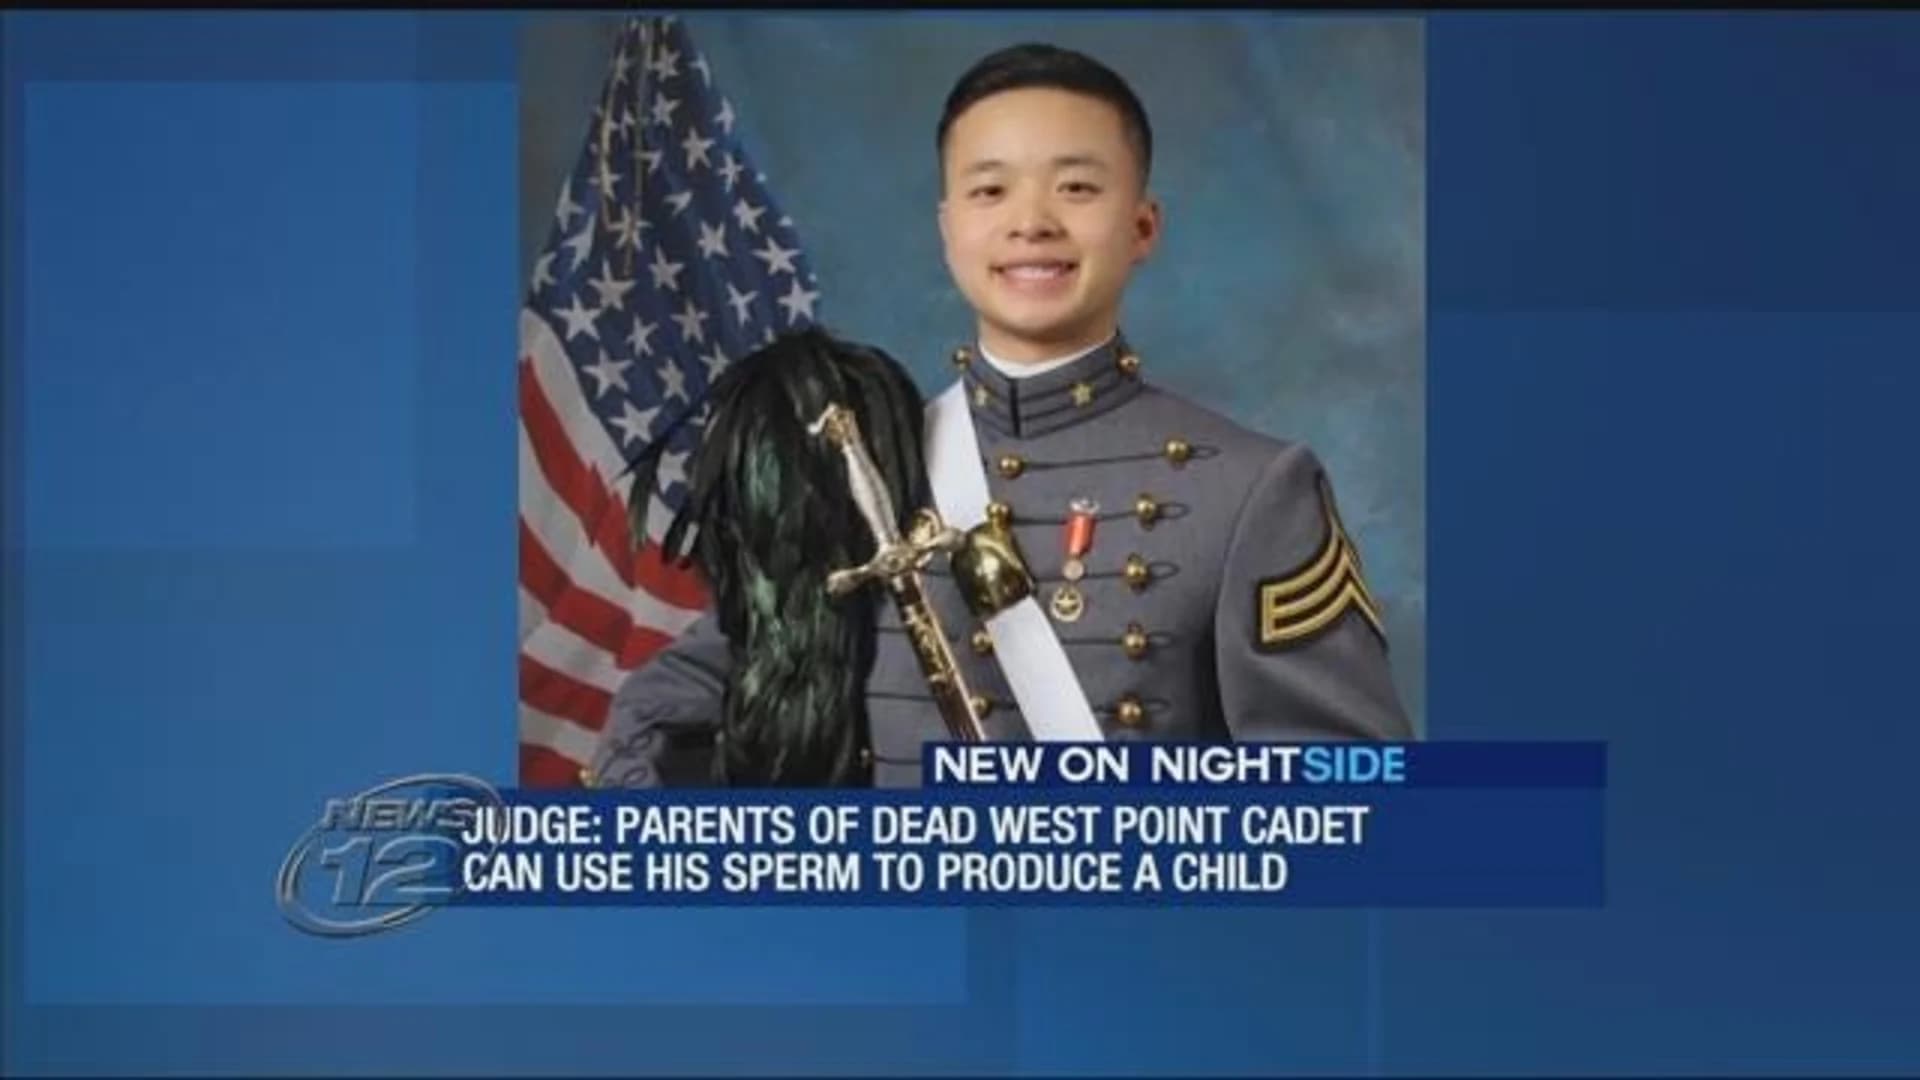 Judge: Parents of dead West Point cadet can use his sperm